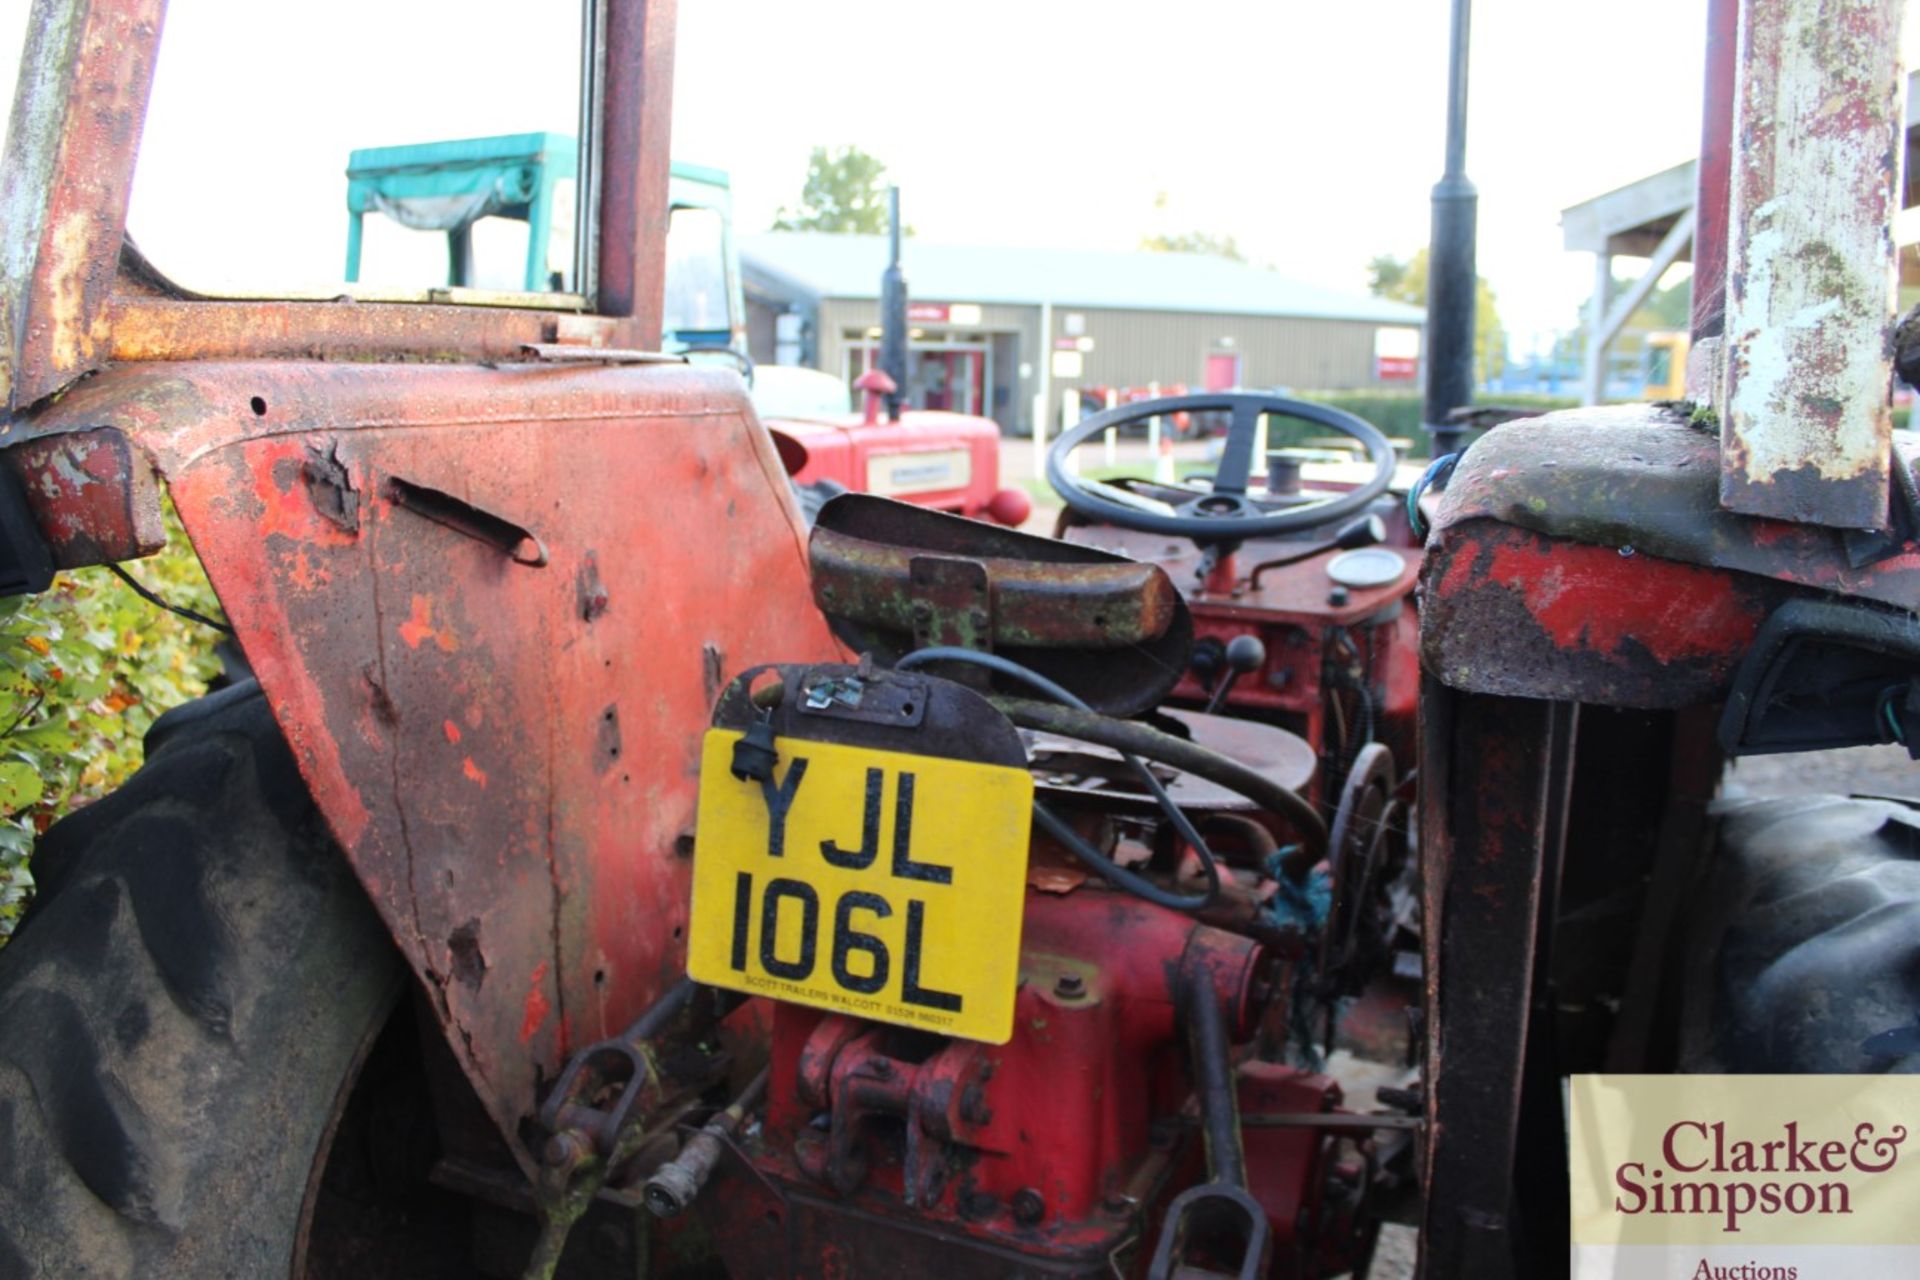 International 434 2WD tractor. Registration YJL 106L. Date of first registration 01/1973. - Image 18 of 21